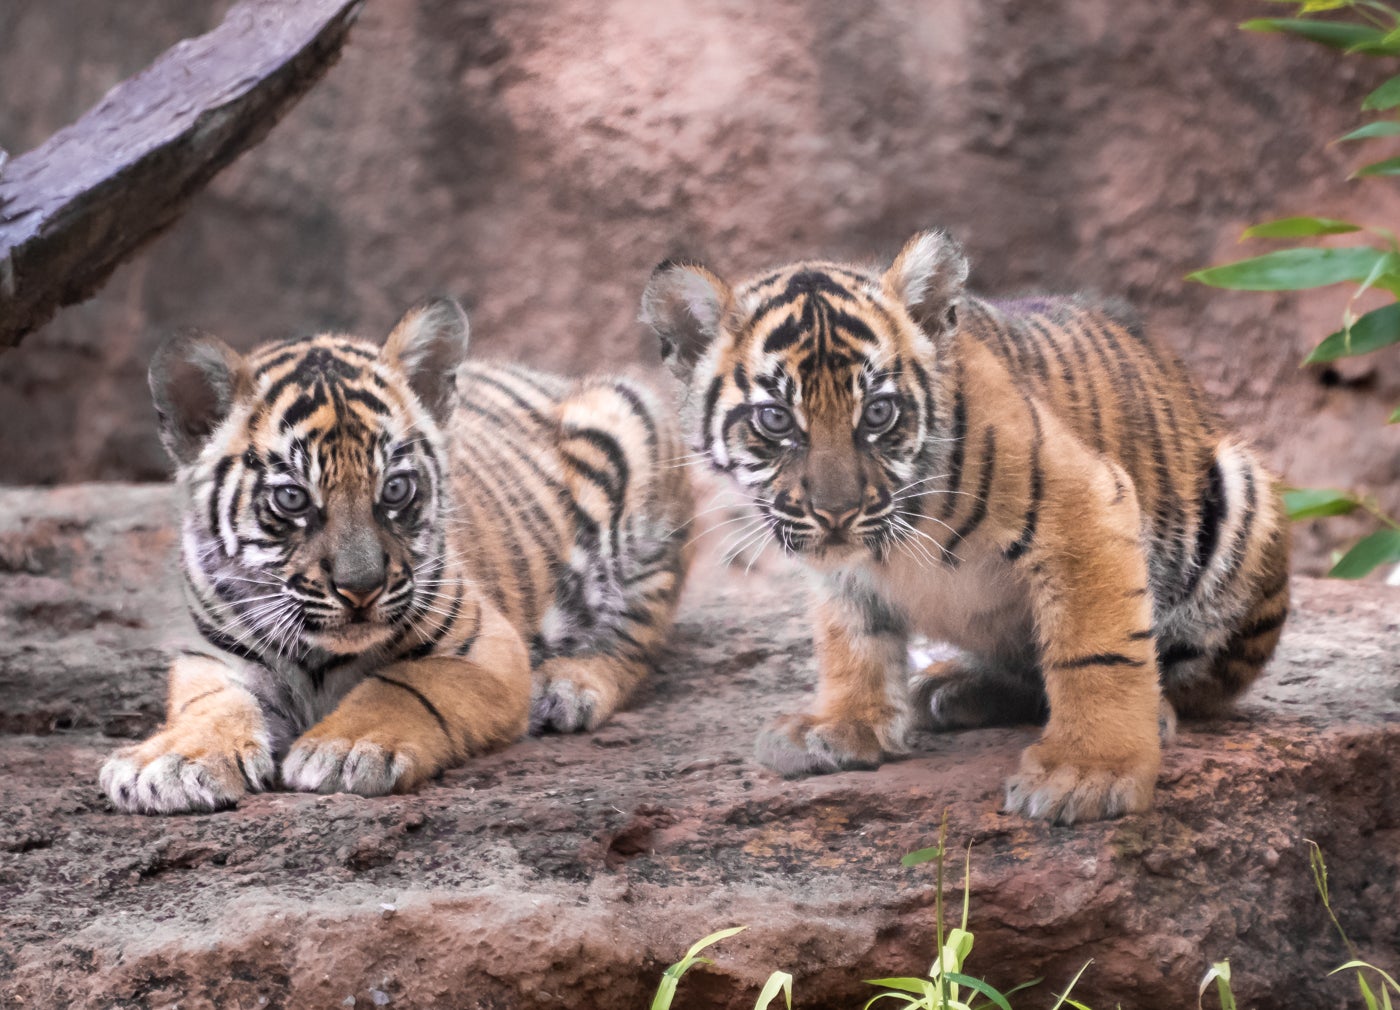 Public can see Oklahoma City Zoo's endangered tiger cubs, Luna and Bob